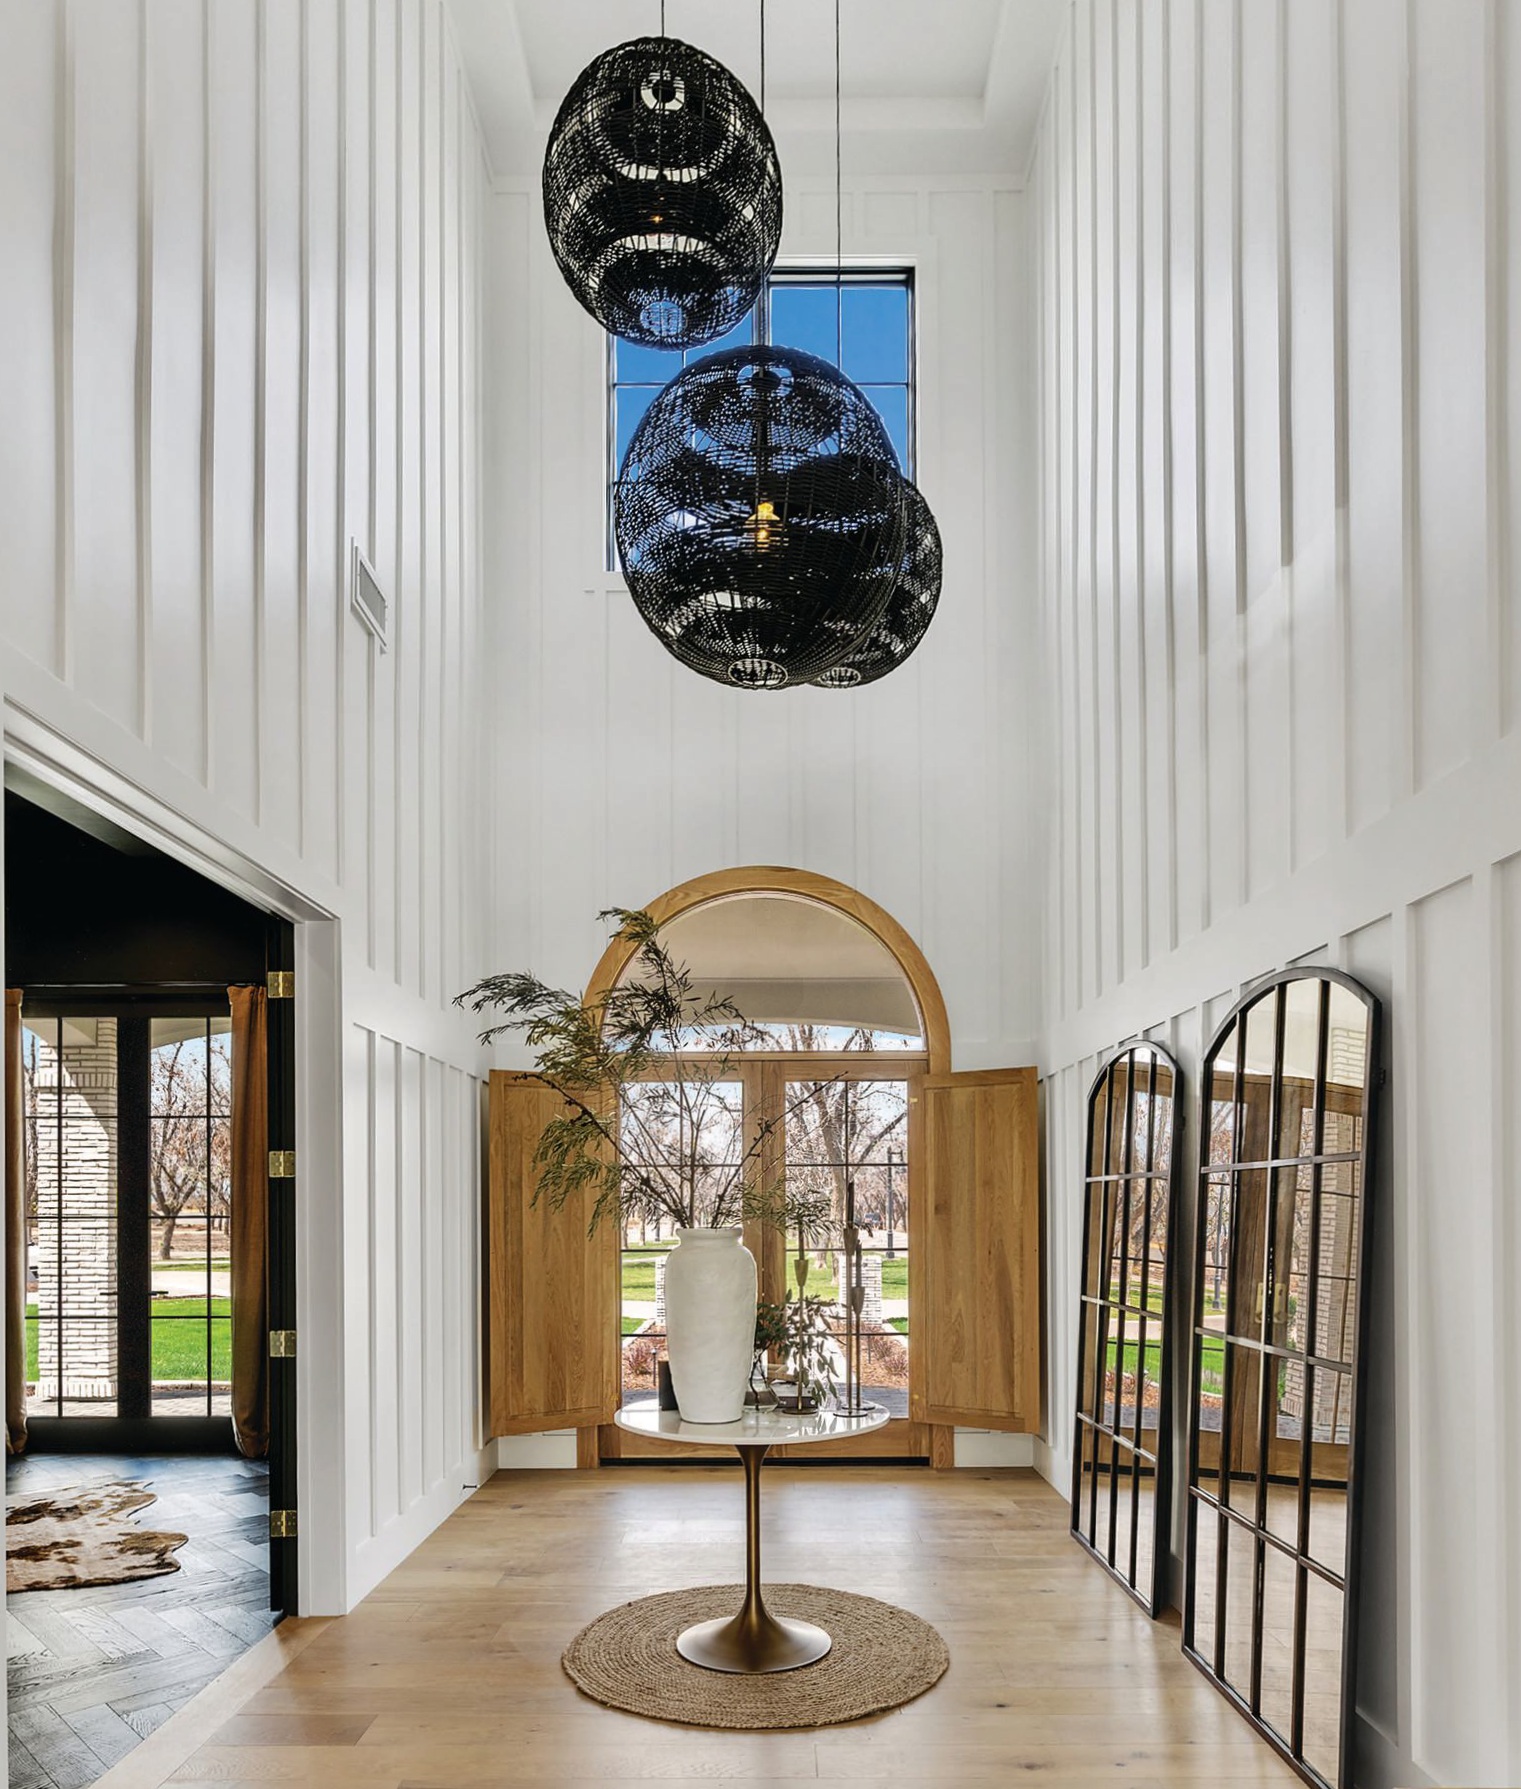 Playful, oversize lighting escalates the wow factor upon entry. PHOTOGRAPHED BY DESERT LENSES PHOTOGRAPHY